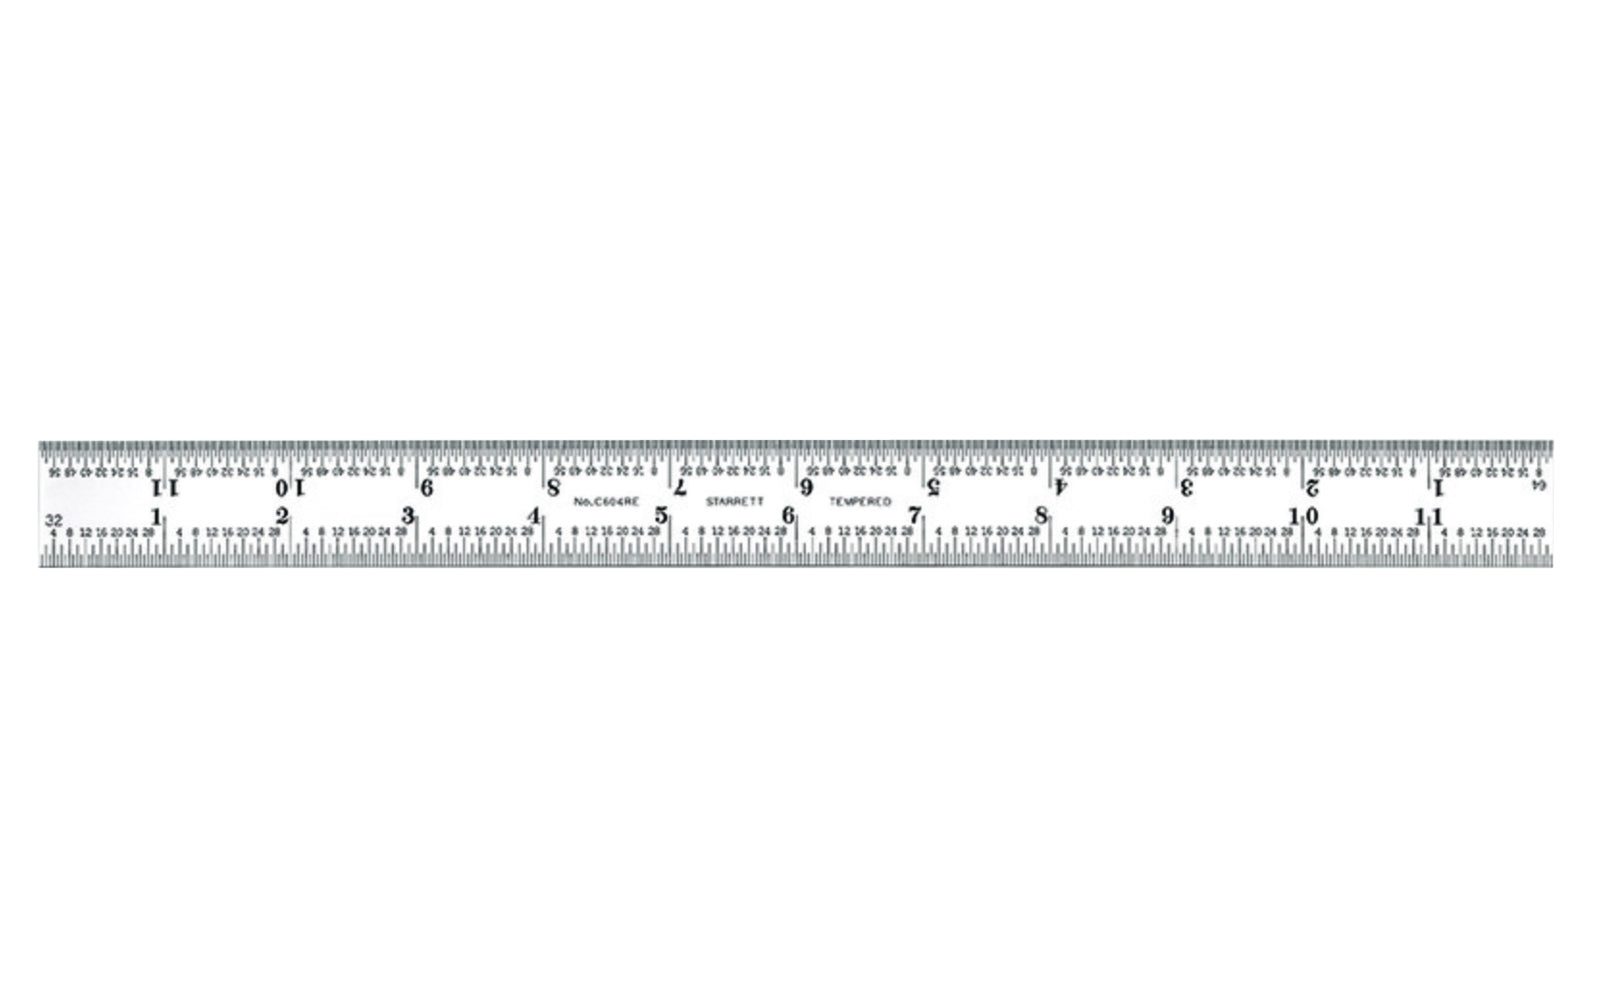 how to read a ruler 32nds